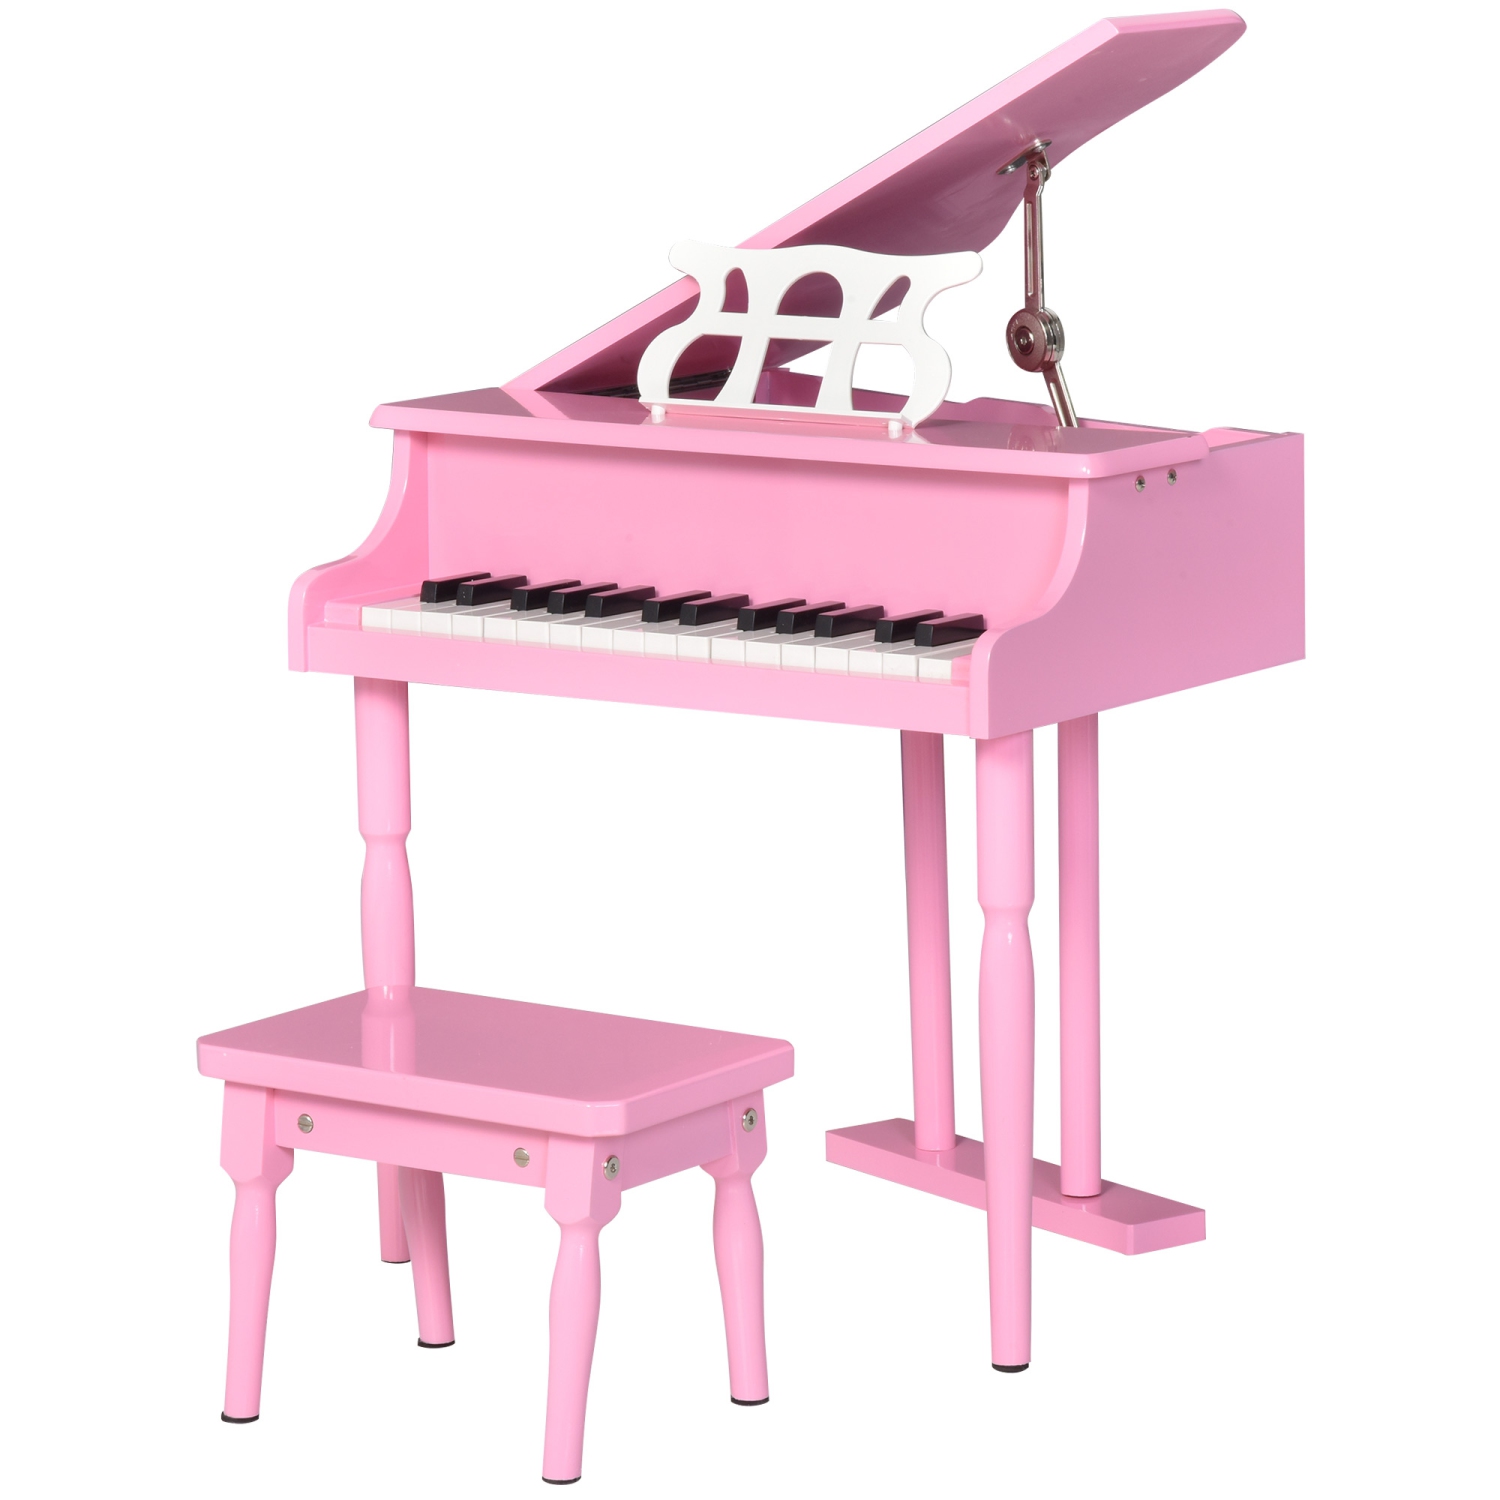 HOMCOM Modern Kids Piano, 30 Keys, Set of 2, Mini Toy for Child, Grand Piano with Music Stand and Bench, Ideal Gift, Pink